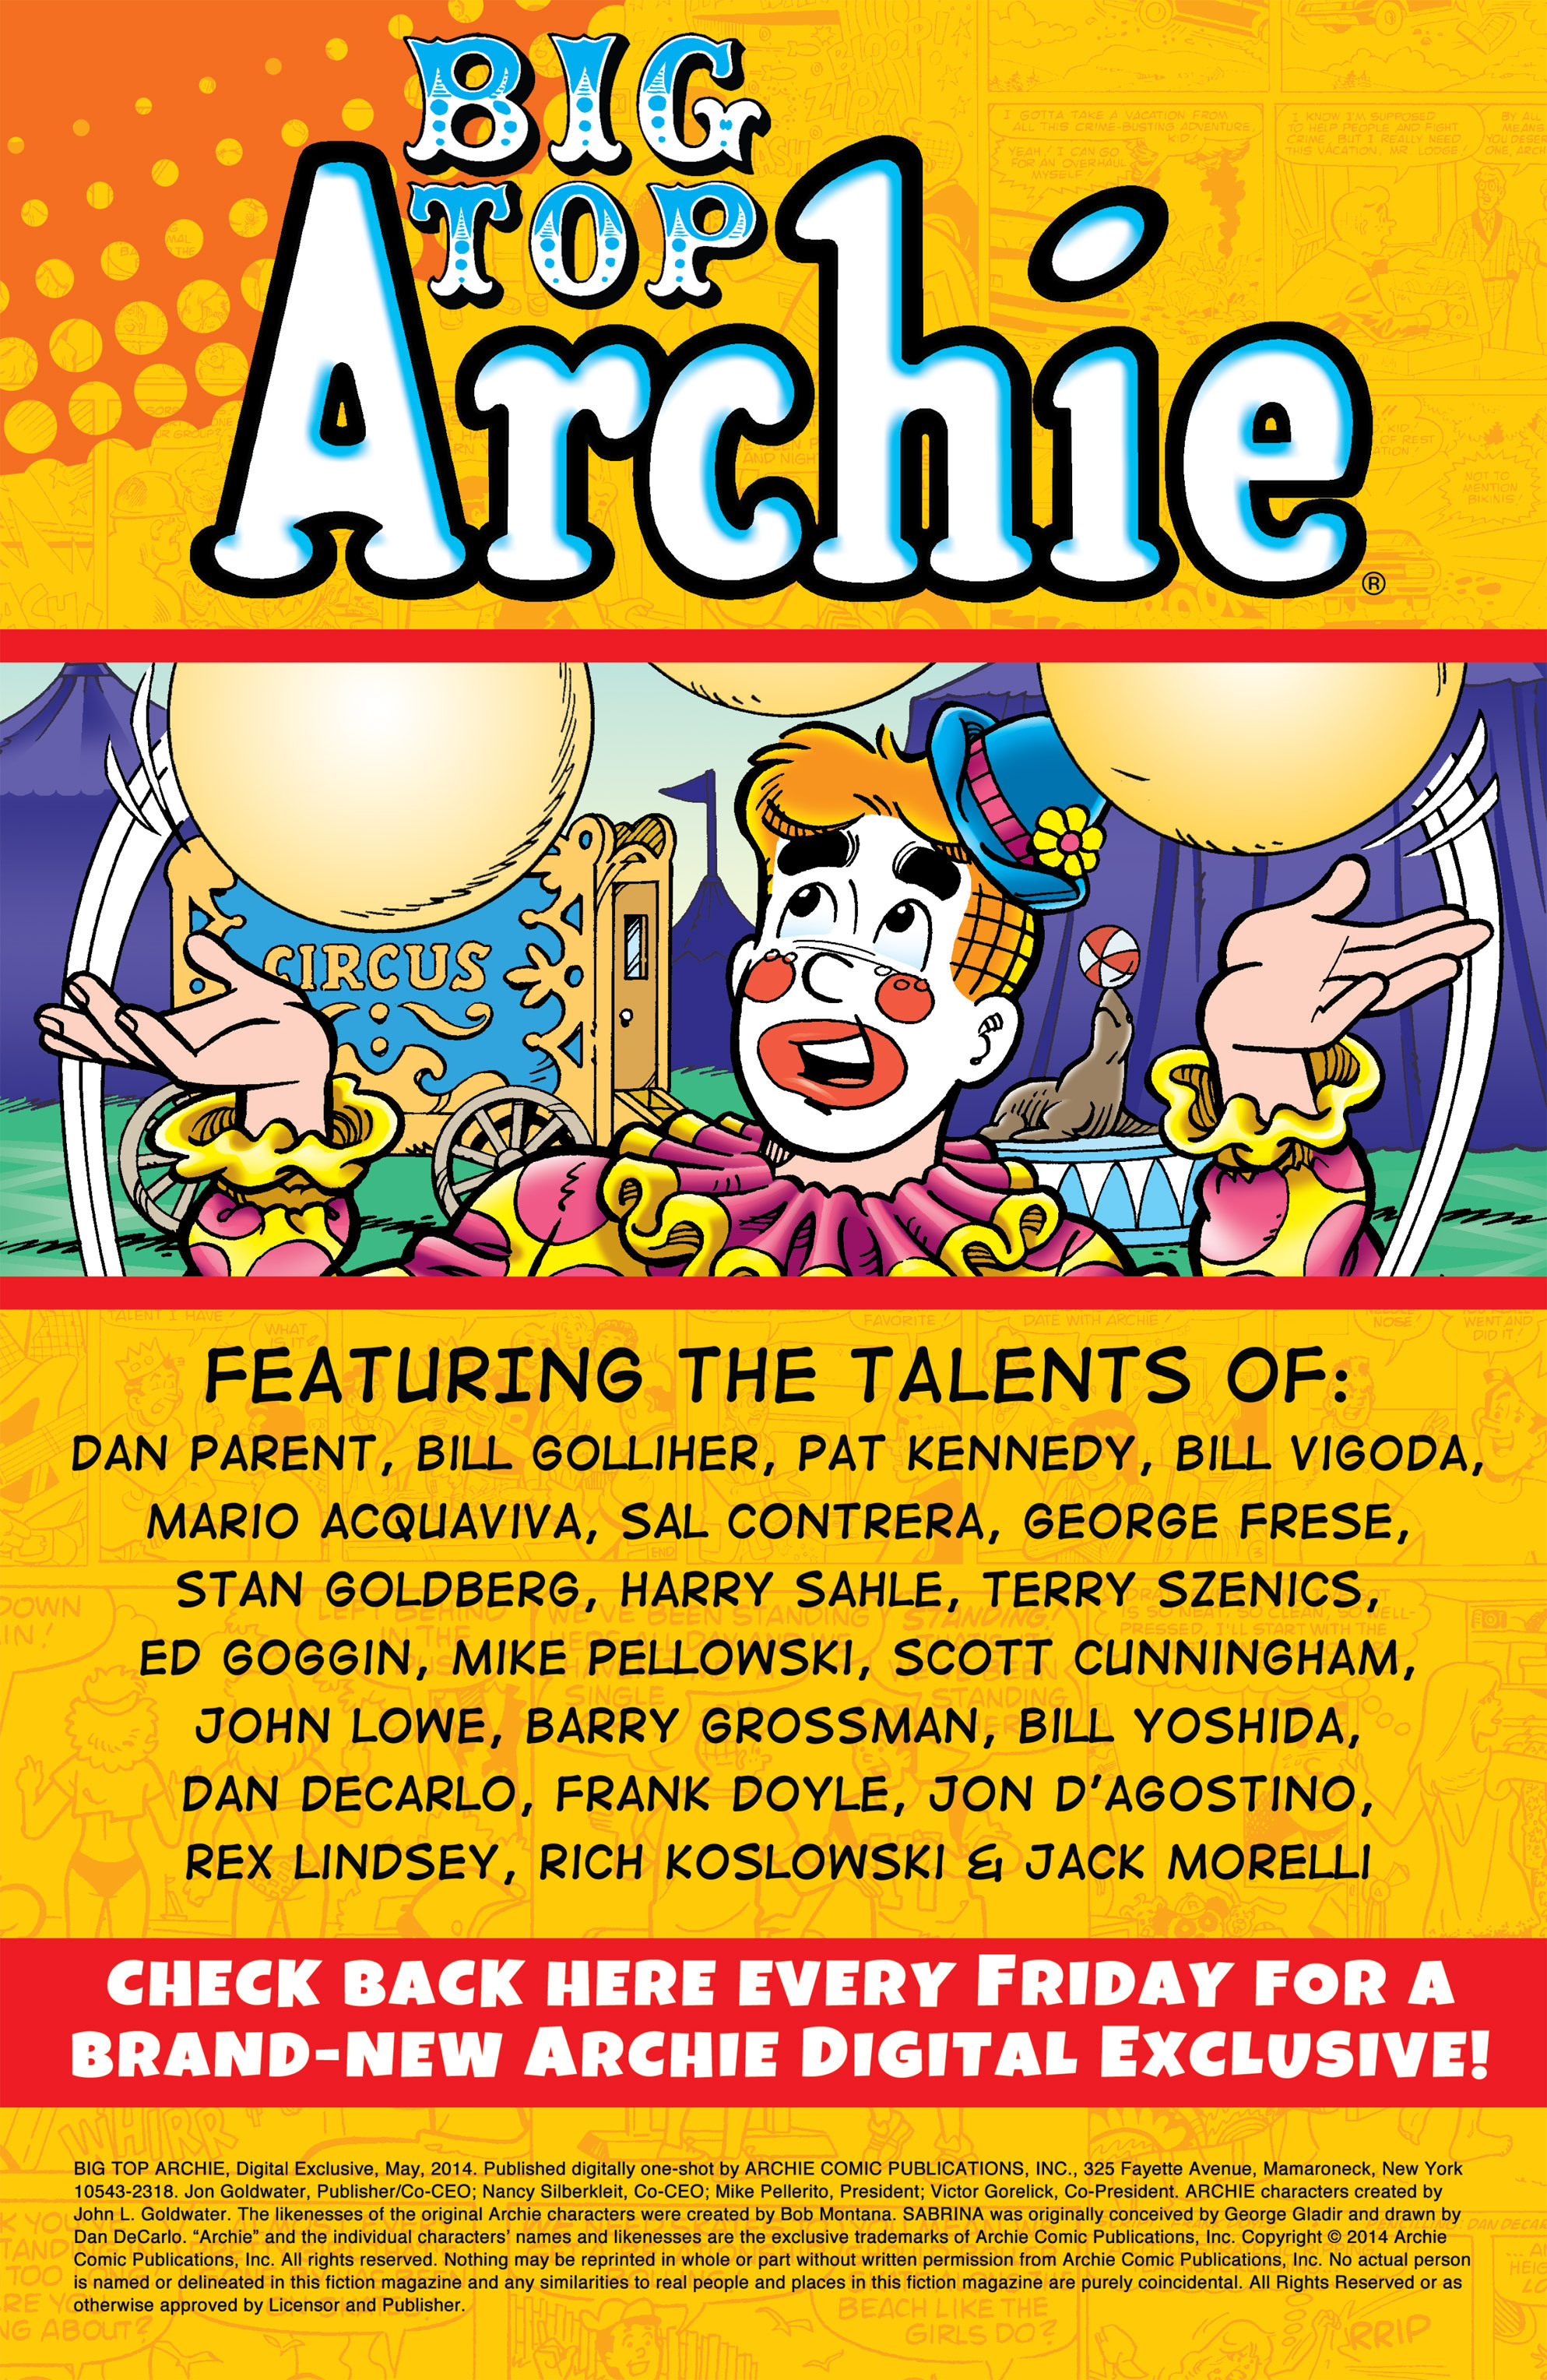 Read online Big Top Archie comic -  Issue # TPB - 2